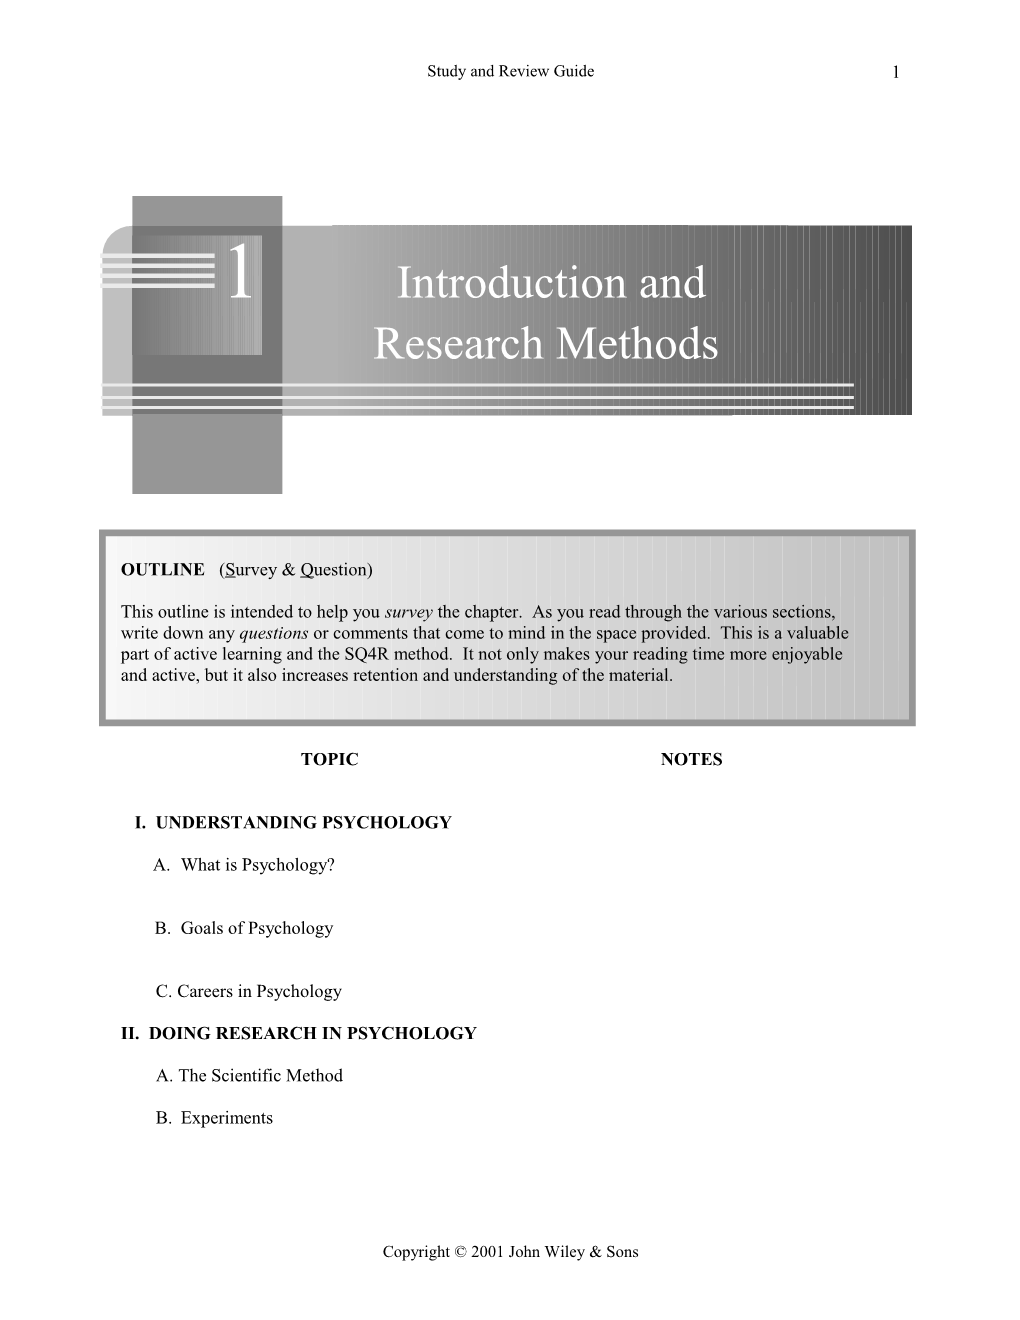 1 Introduction and Research Methods